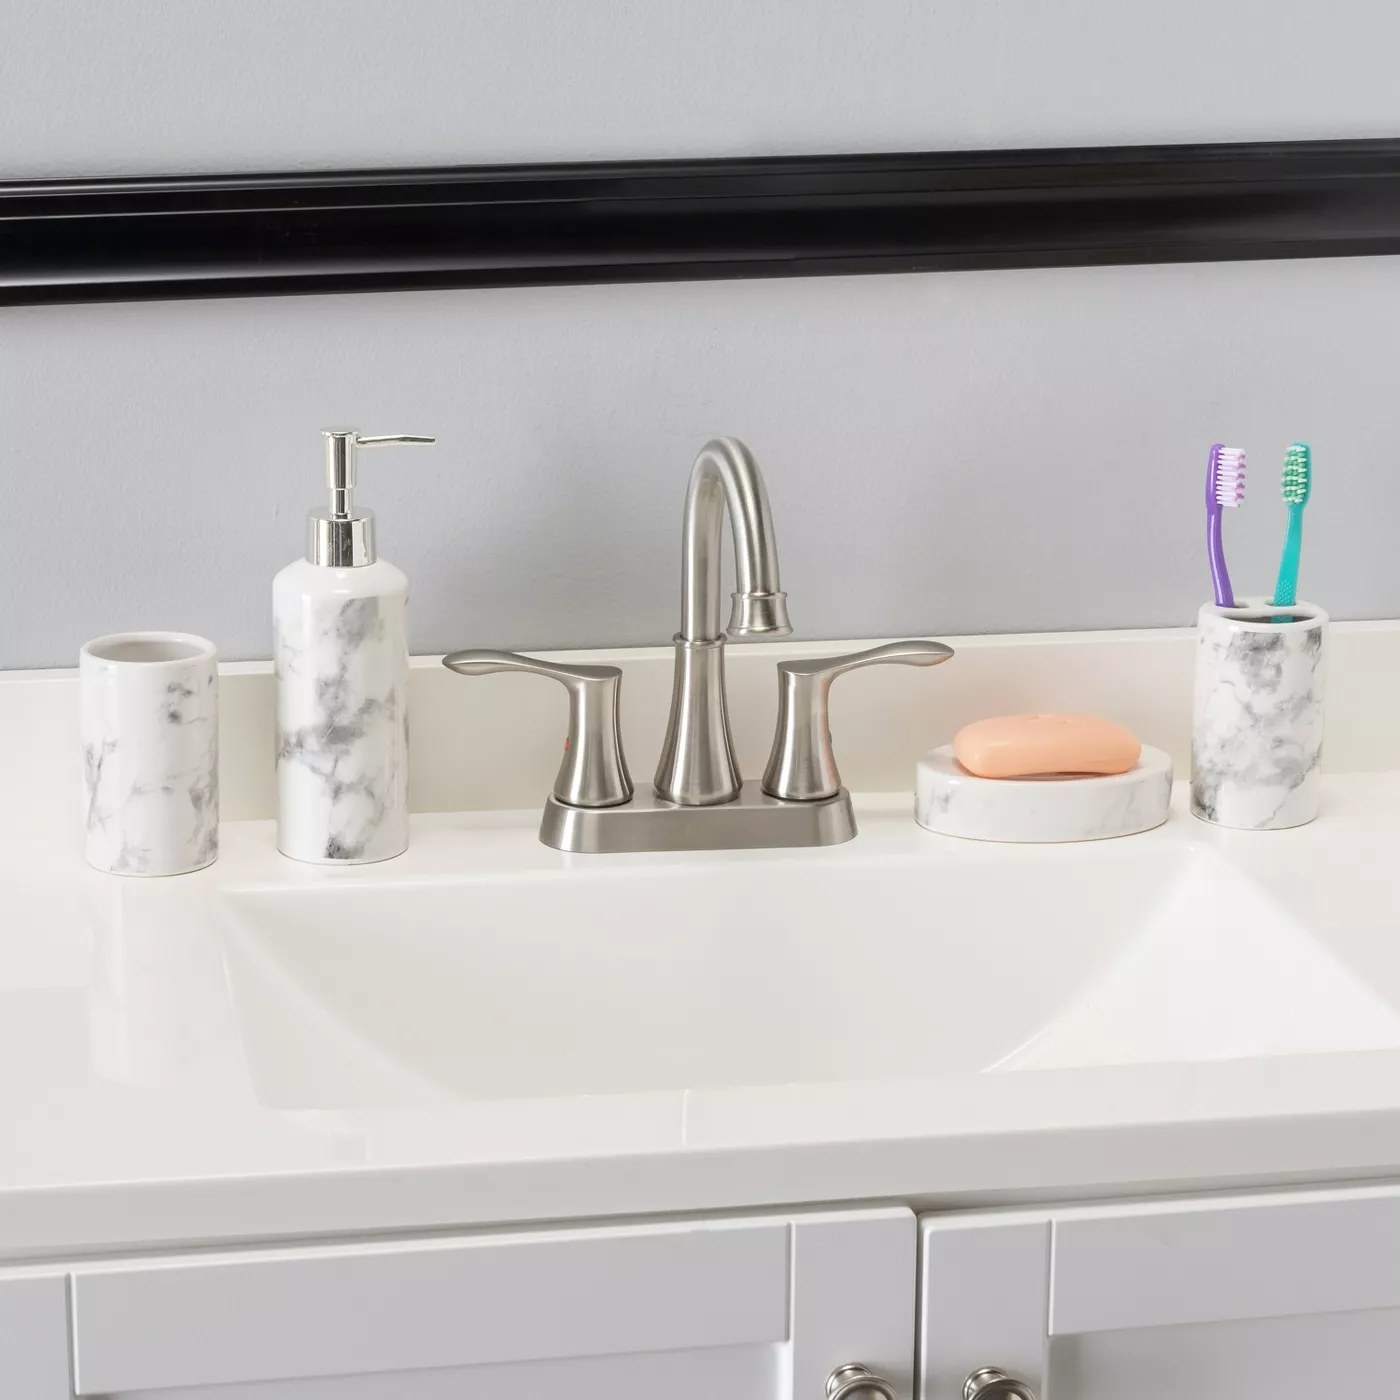 A marble soap pump, soap dish, toothbrush holder, and cup